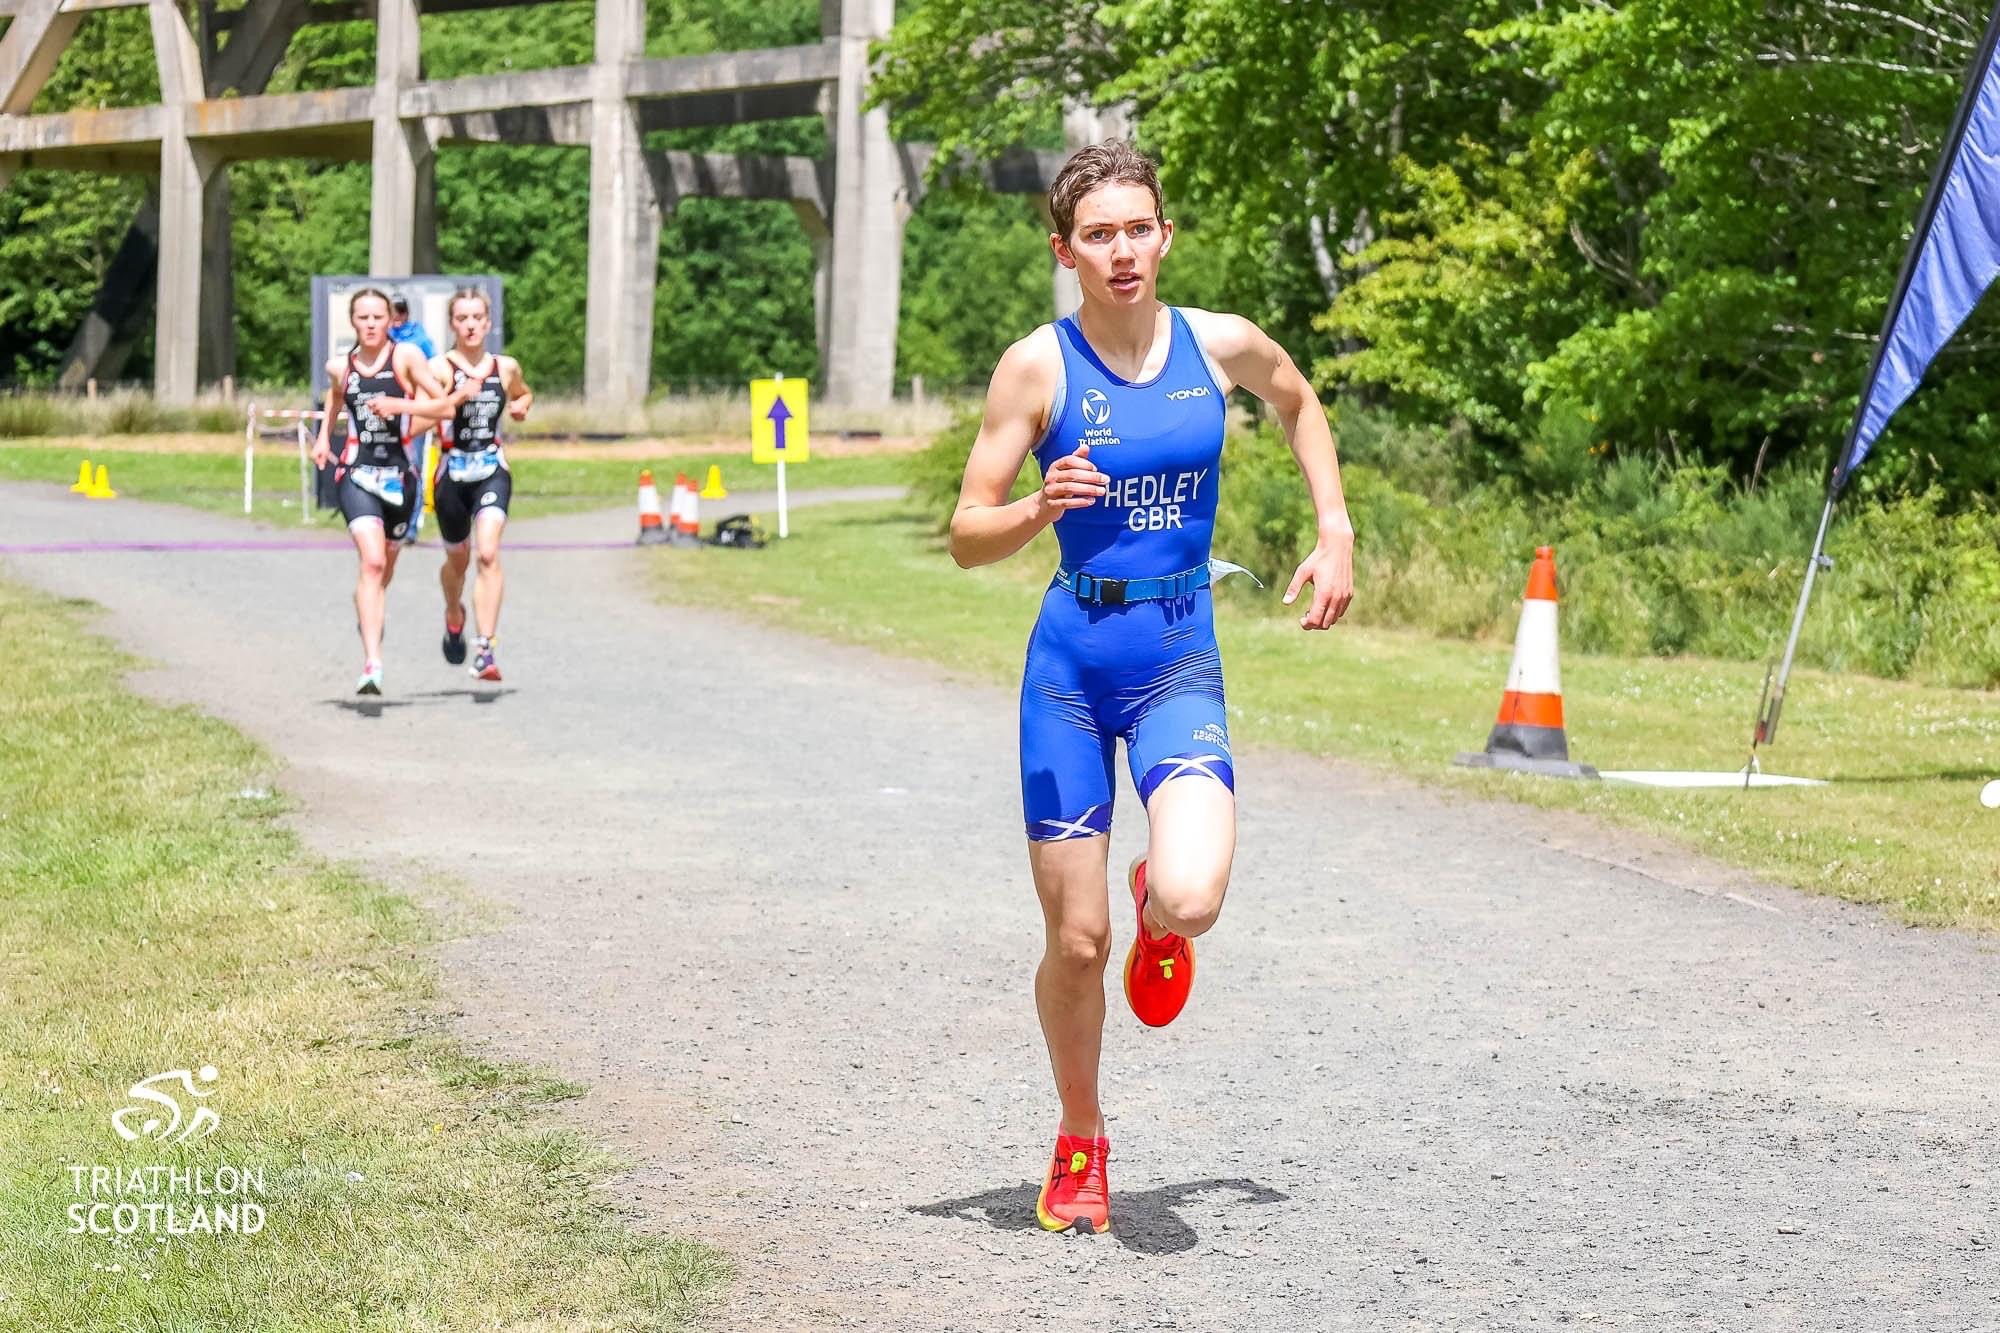 Close racing at Lochore Meadows in first aquathlon for youth and junior athletes